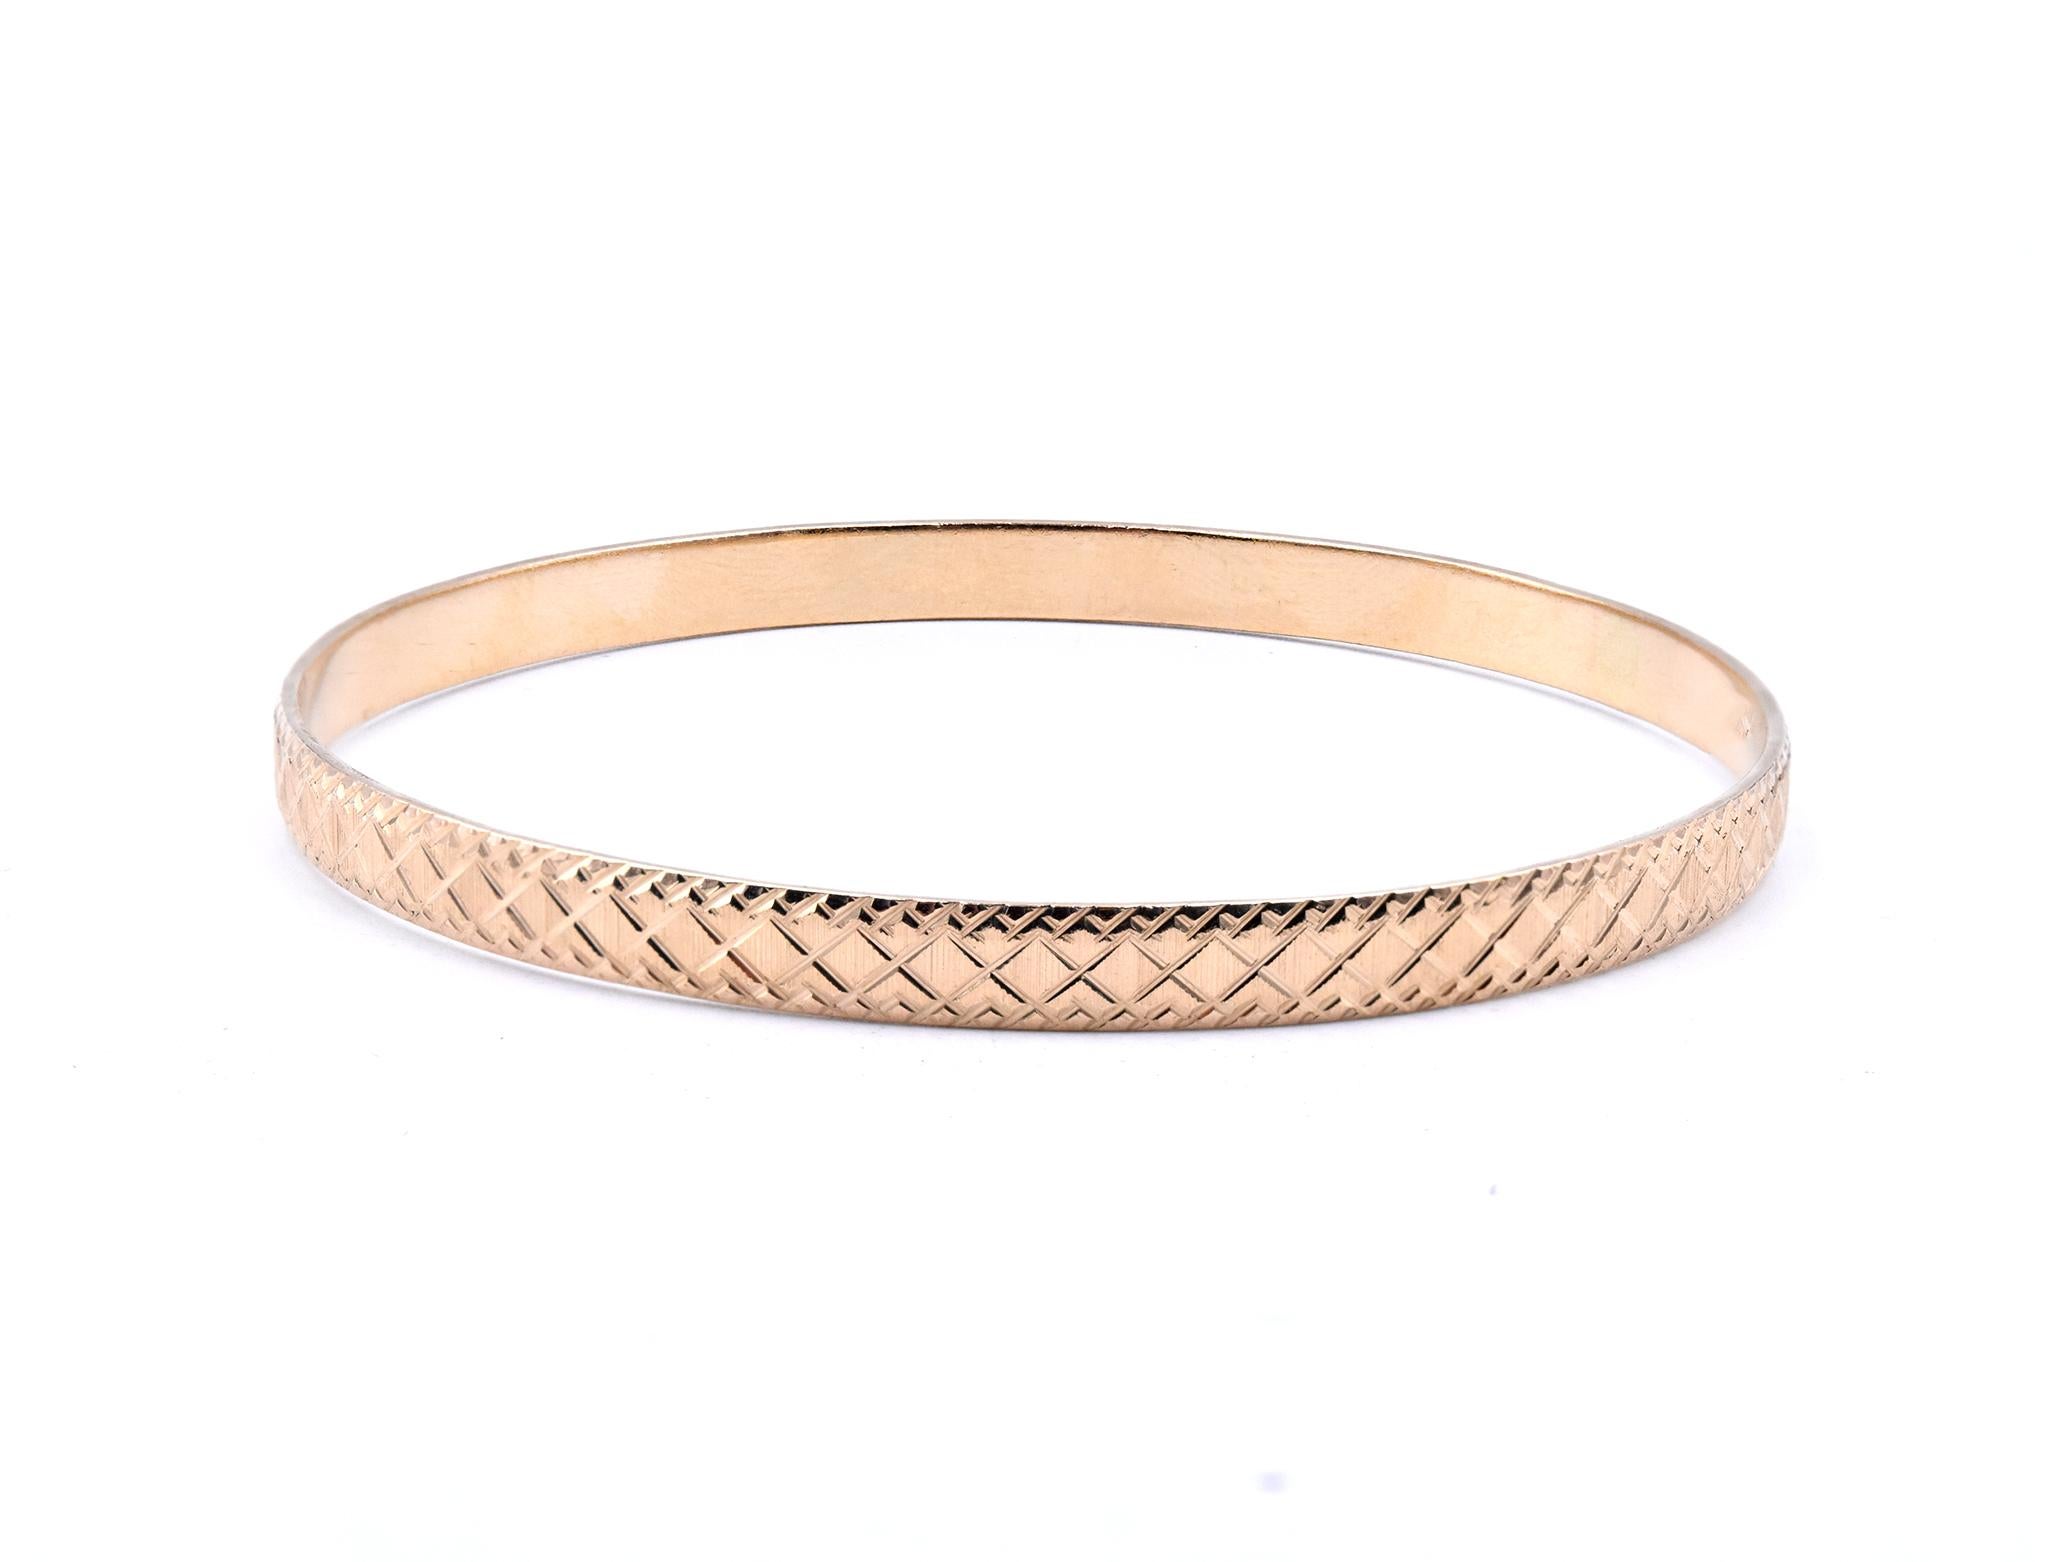 Designer: custom
Material: 12K yellow gold
Dimensions: bracelet will fit up to a 8-Inch wrist
Weight: 16.30 grams

